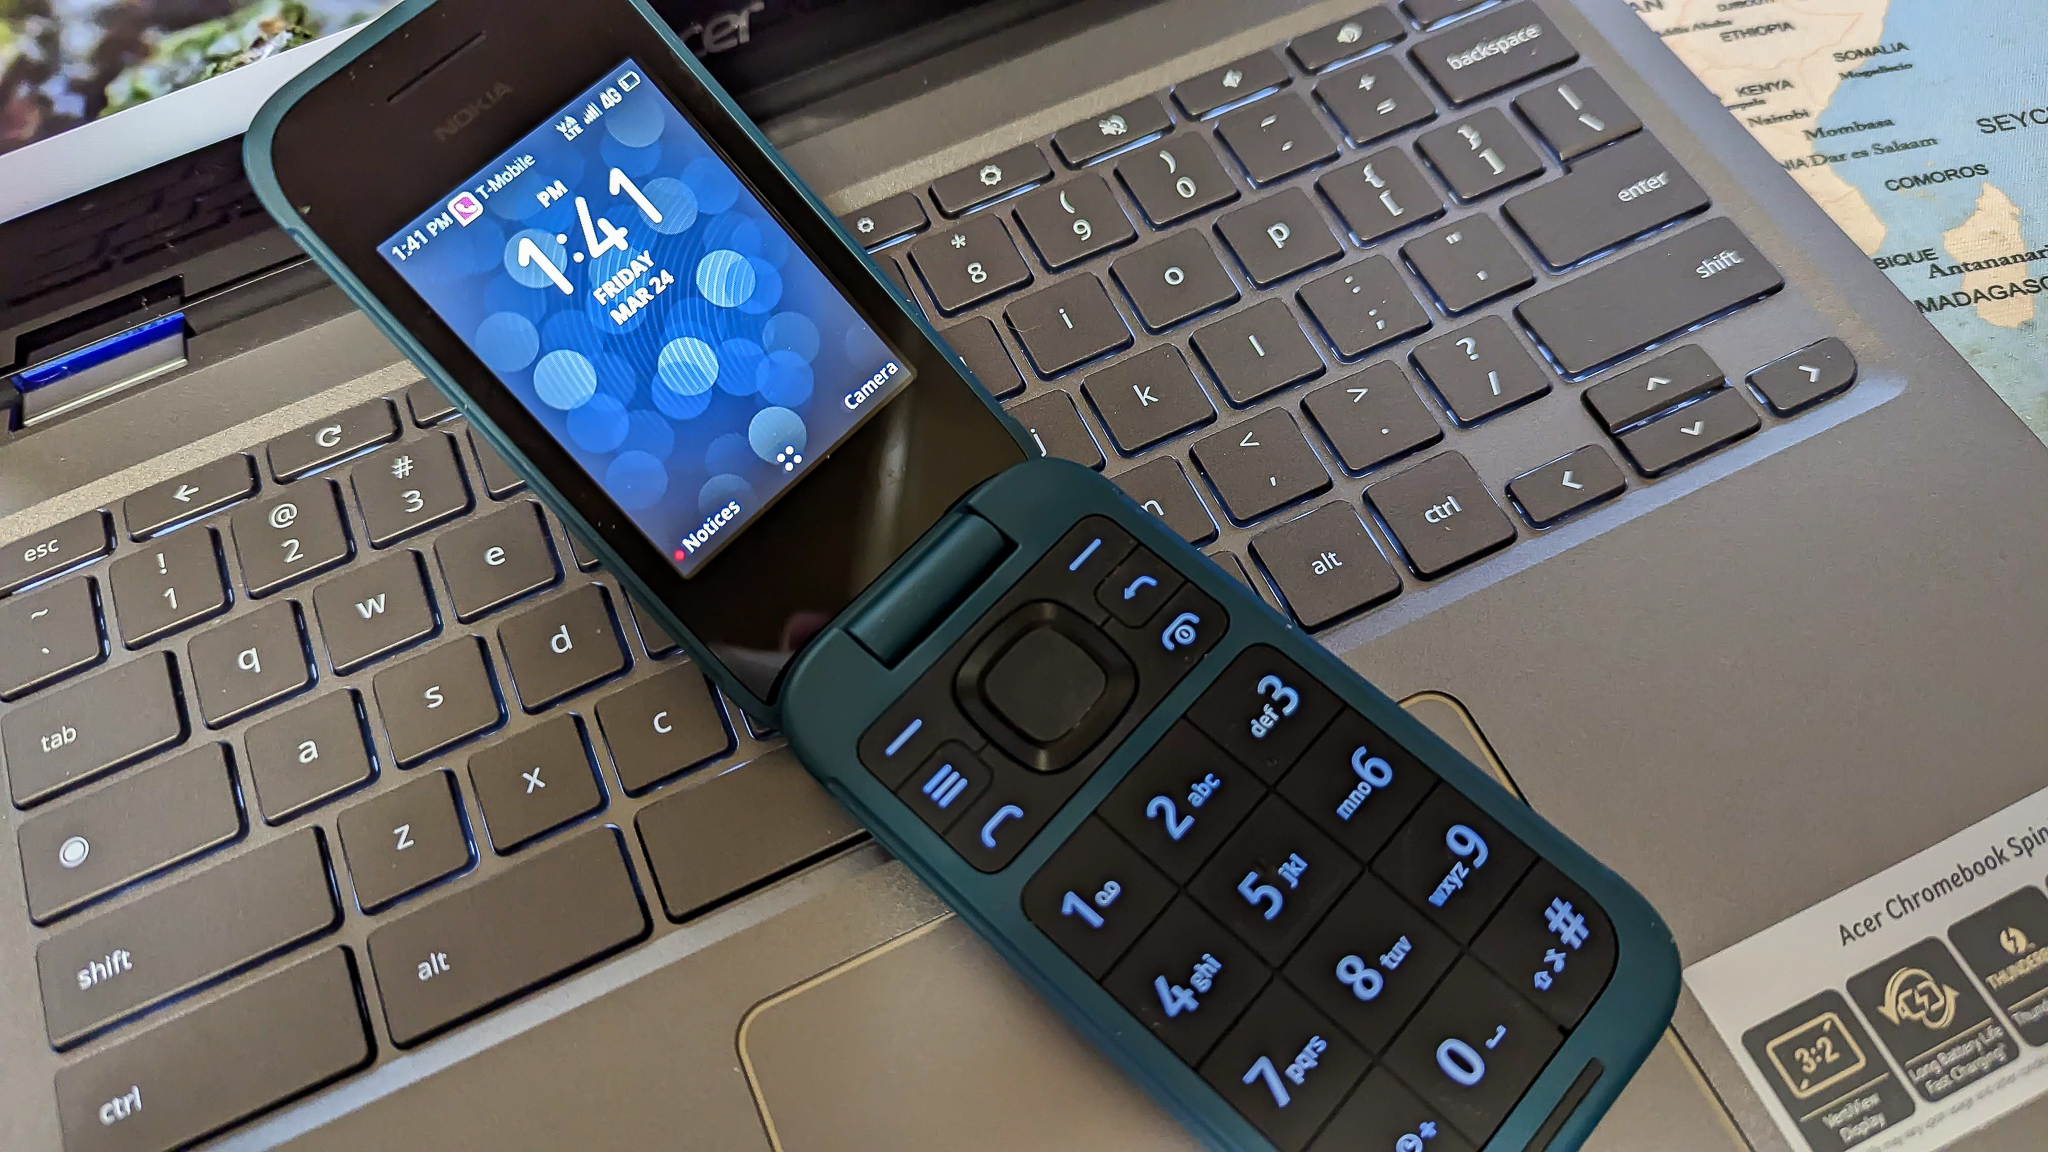 Emulation on a Flip Phone - Great Budget 1 handed waterproof and